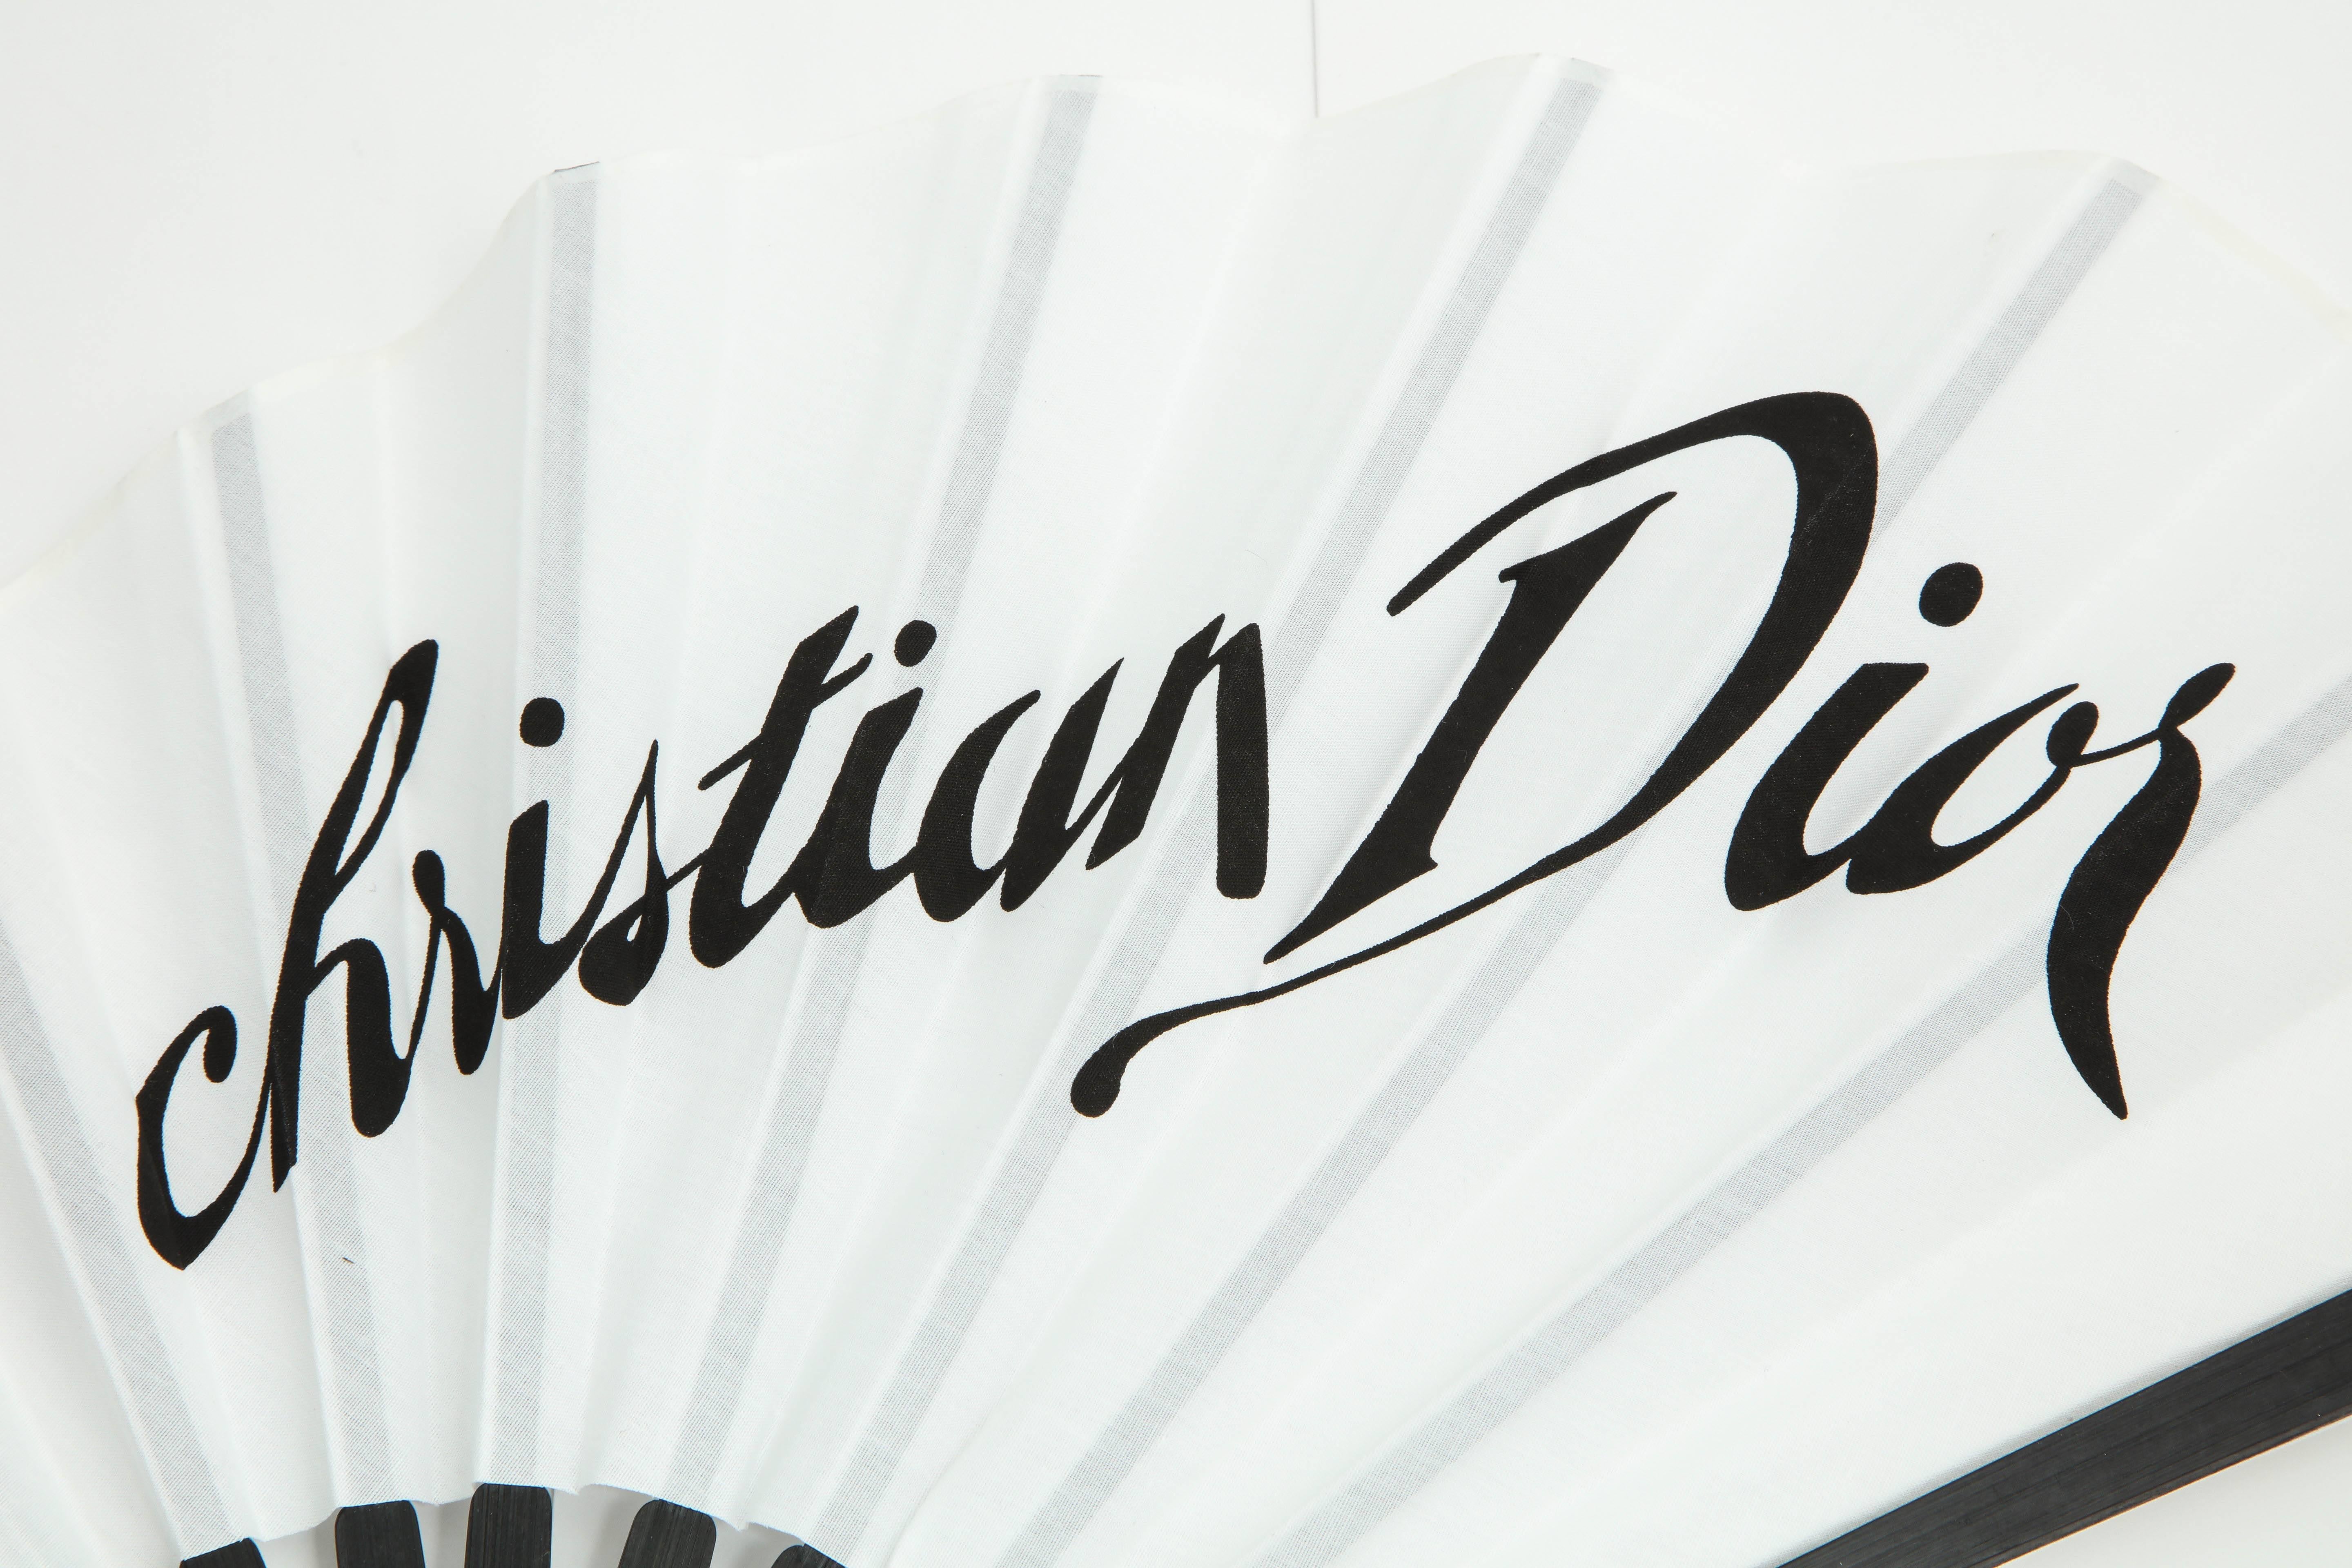 Extremely rare Christian Dior by John Galliano fan in black and white. 
Made of fabric.